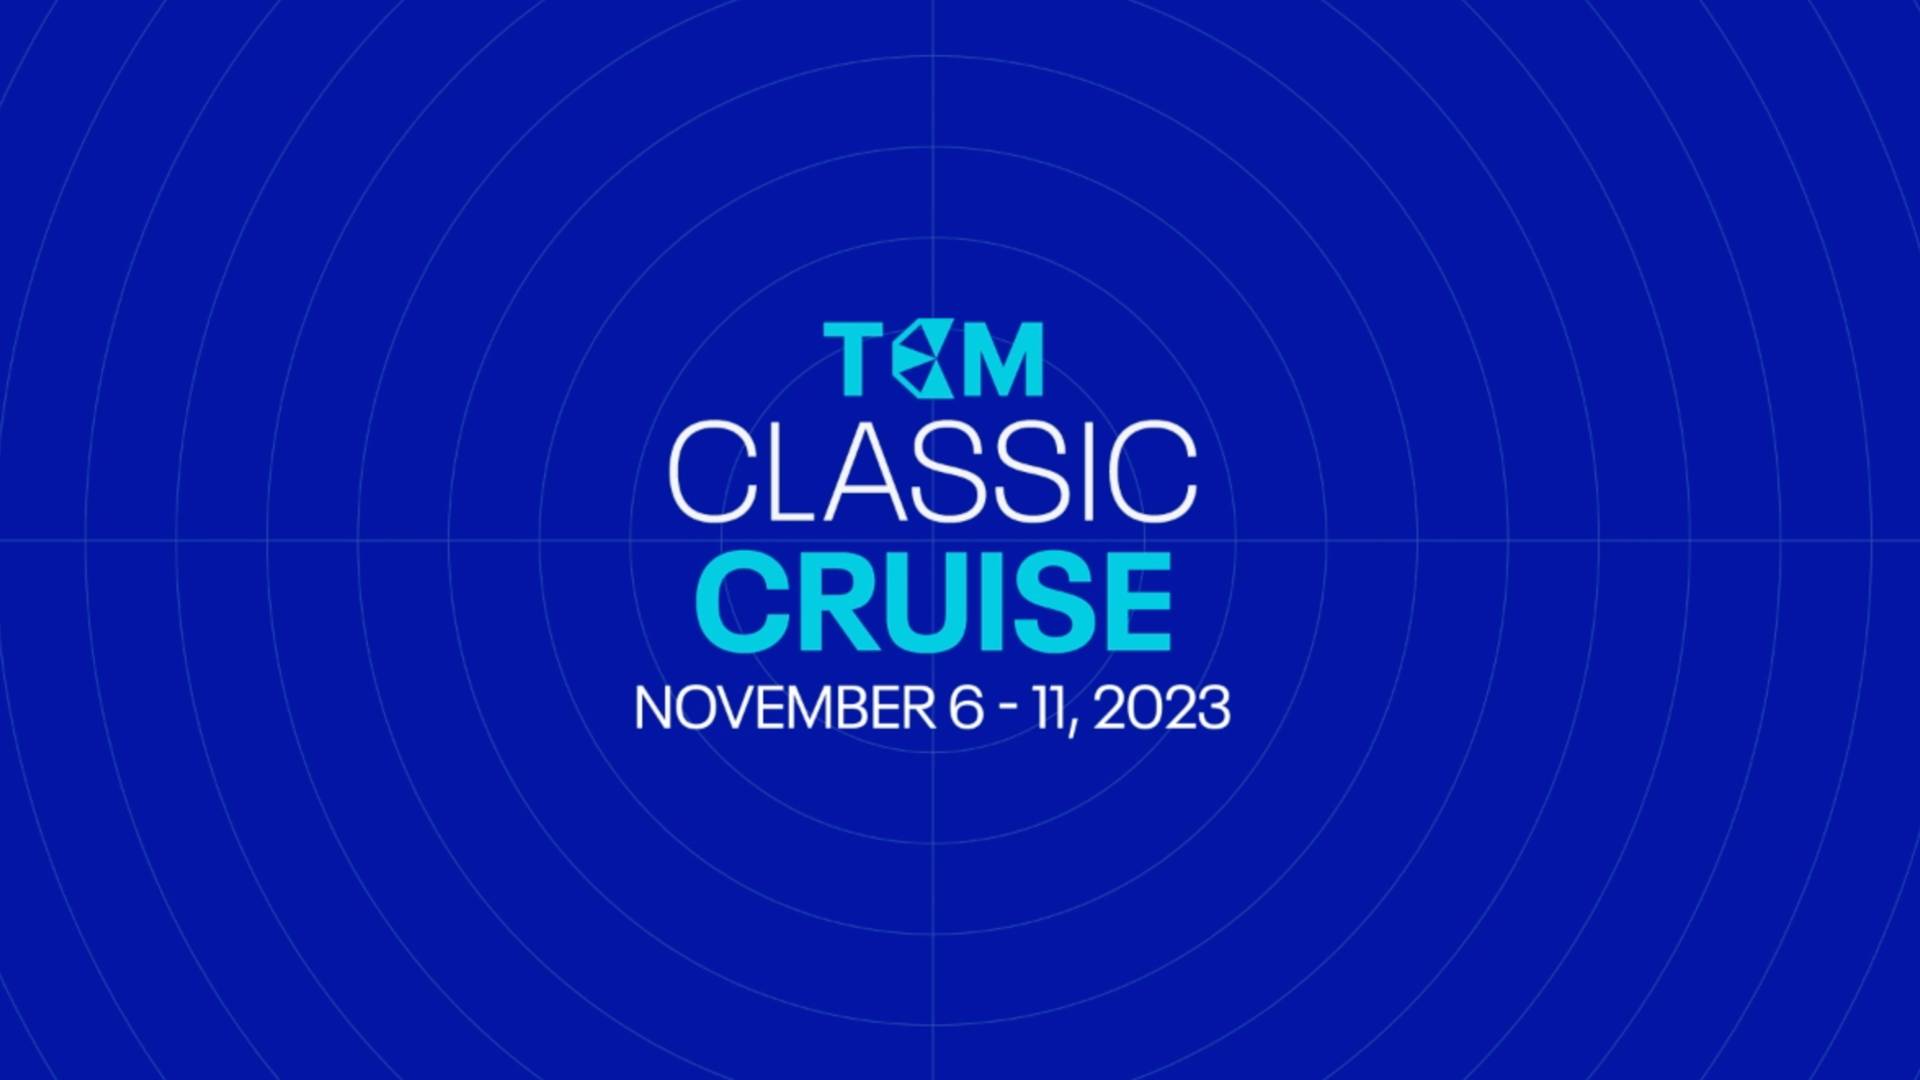 TCM Classic Cruise Returns in 2023 With Brand New West Coast Itinerary